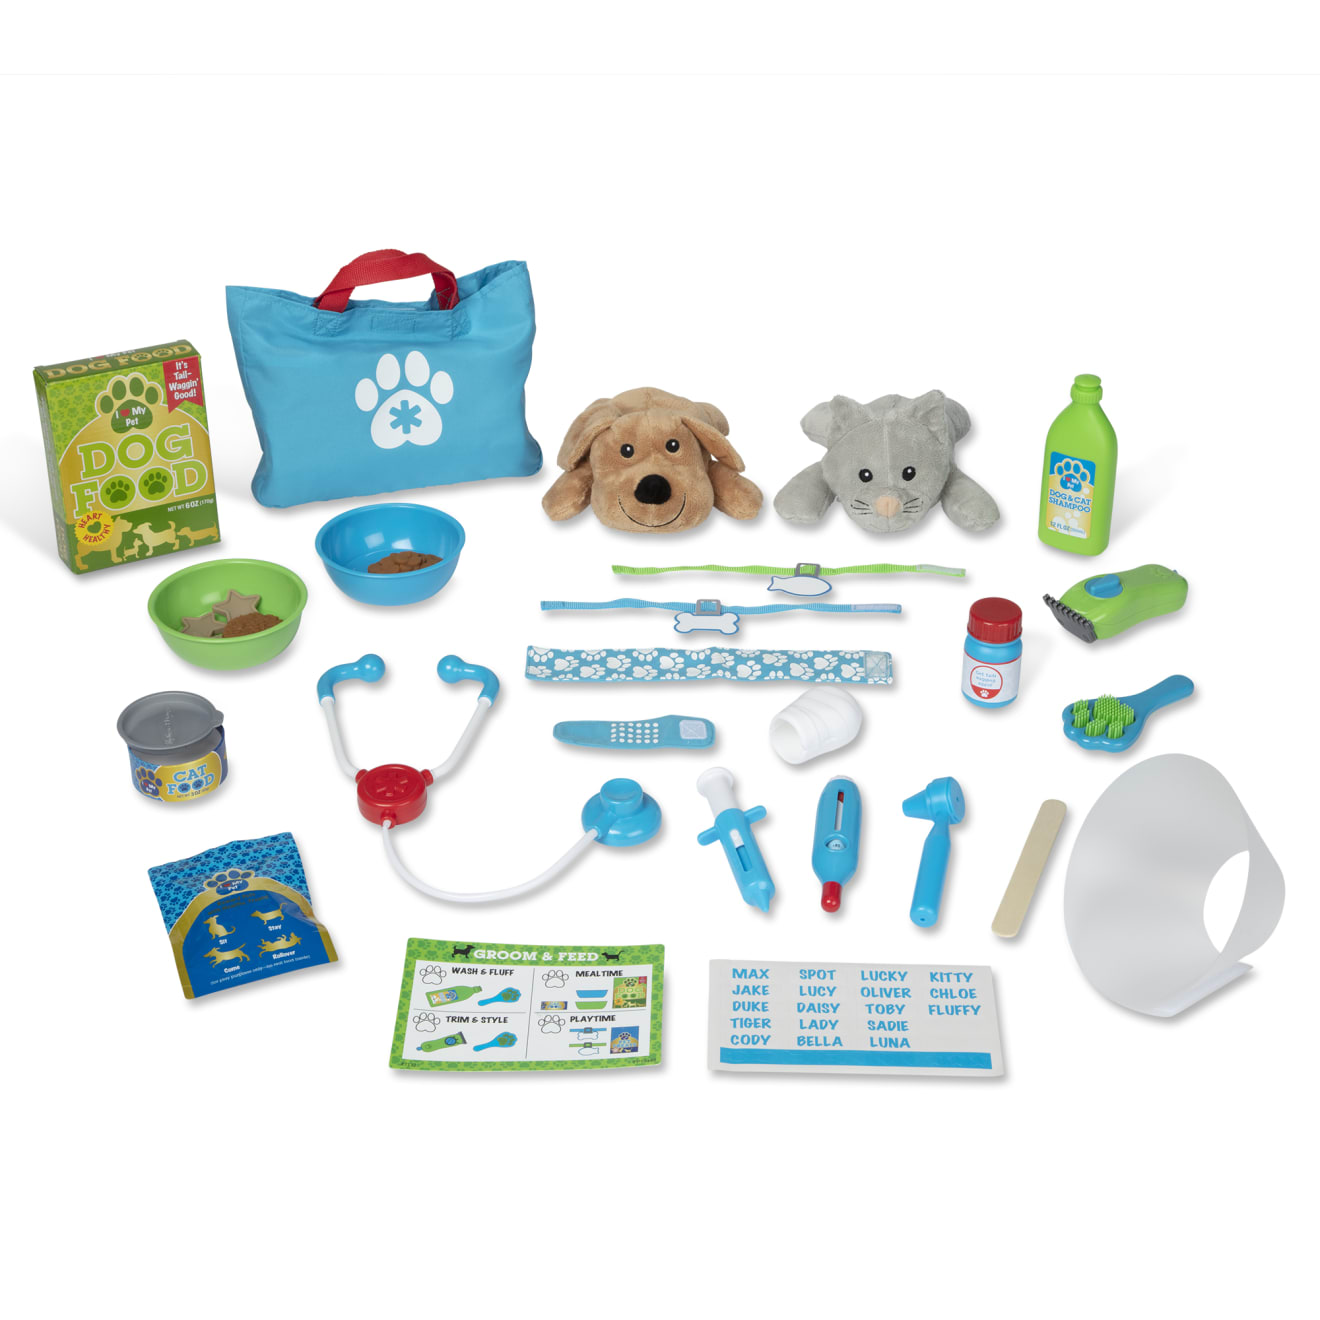 https://cdn.shopify.com/s/files/1/0550/8487/5830/products/Deluxe-Pet-Care-Play-Set-007132-1-Pieces-Out.jpg?v=1664894501